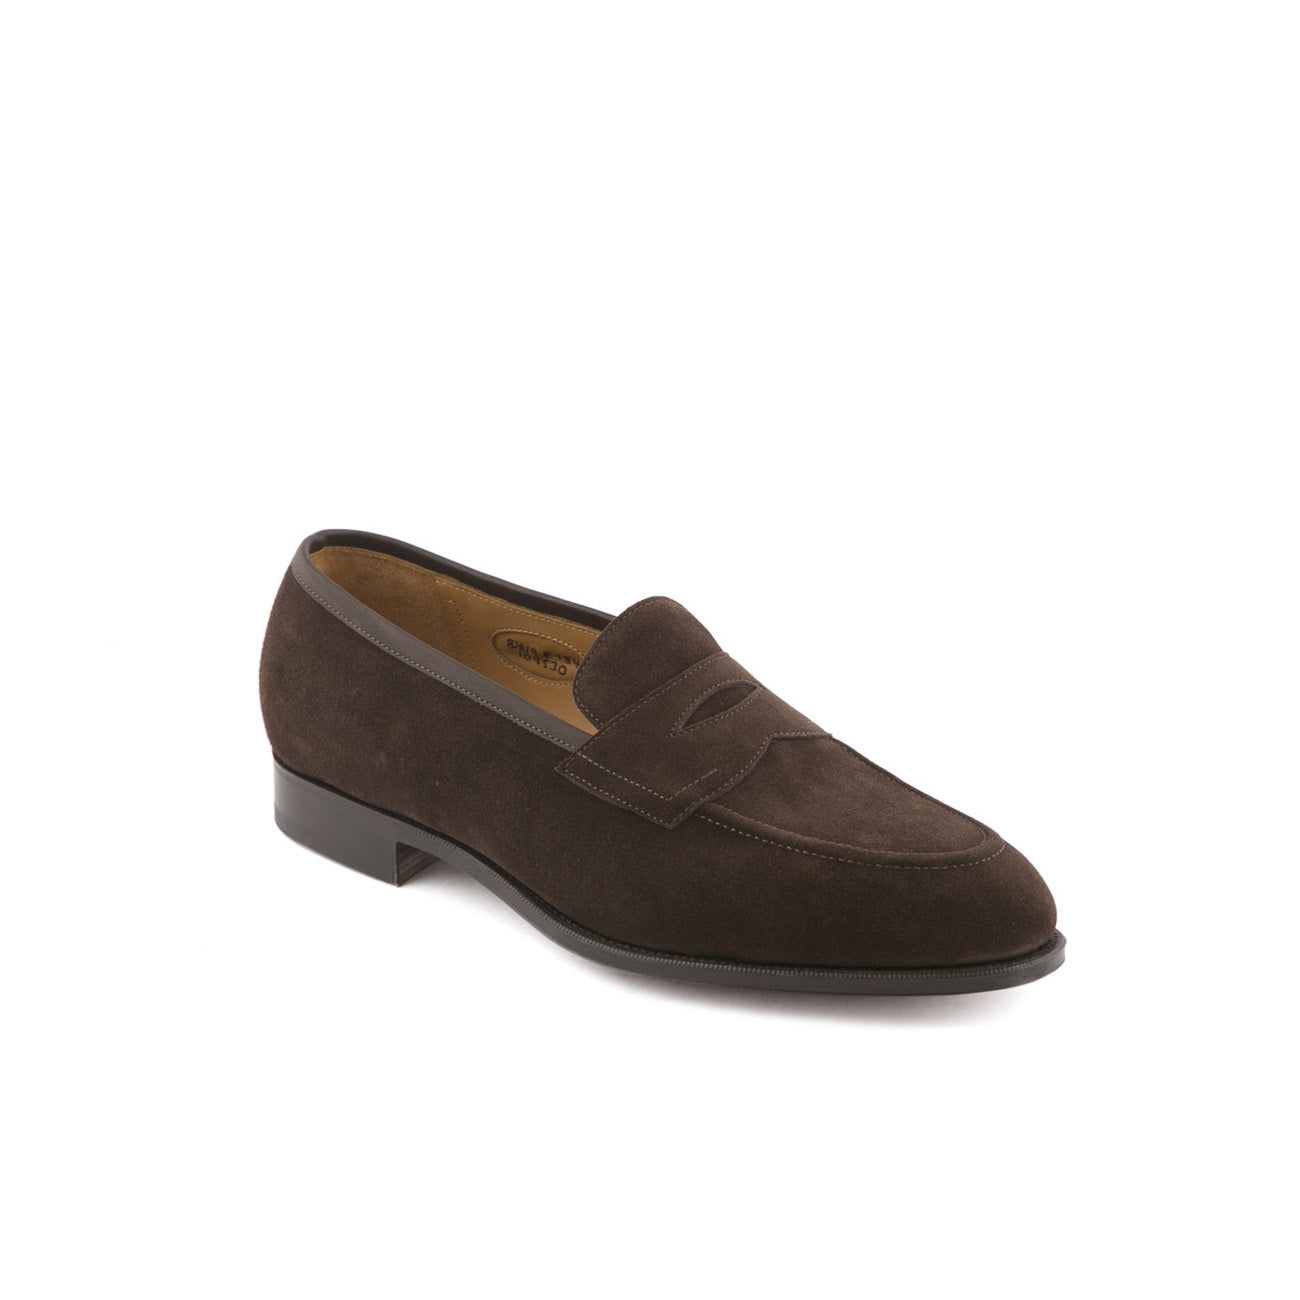 Mocassino penny loafer Edward Green Piccadilly in camoscio marrone